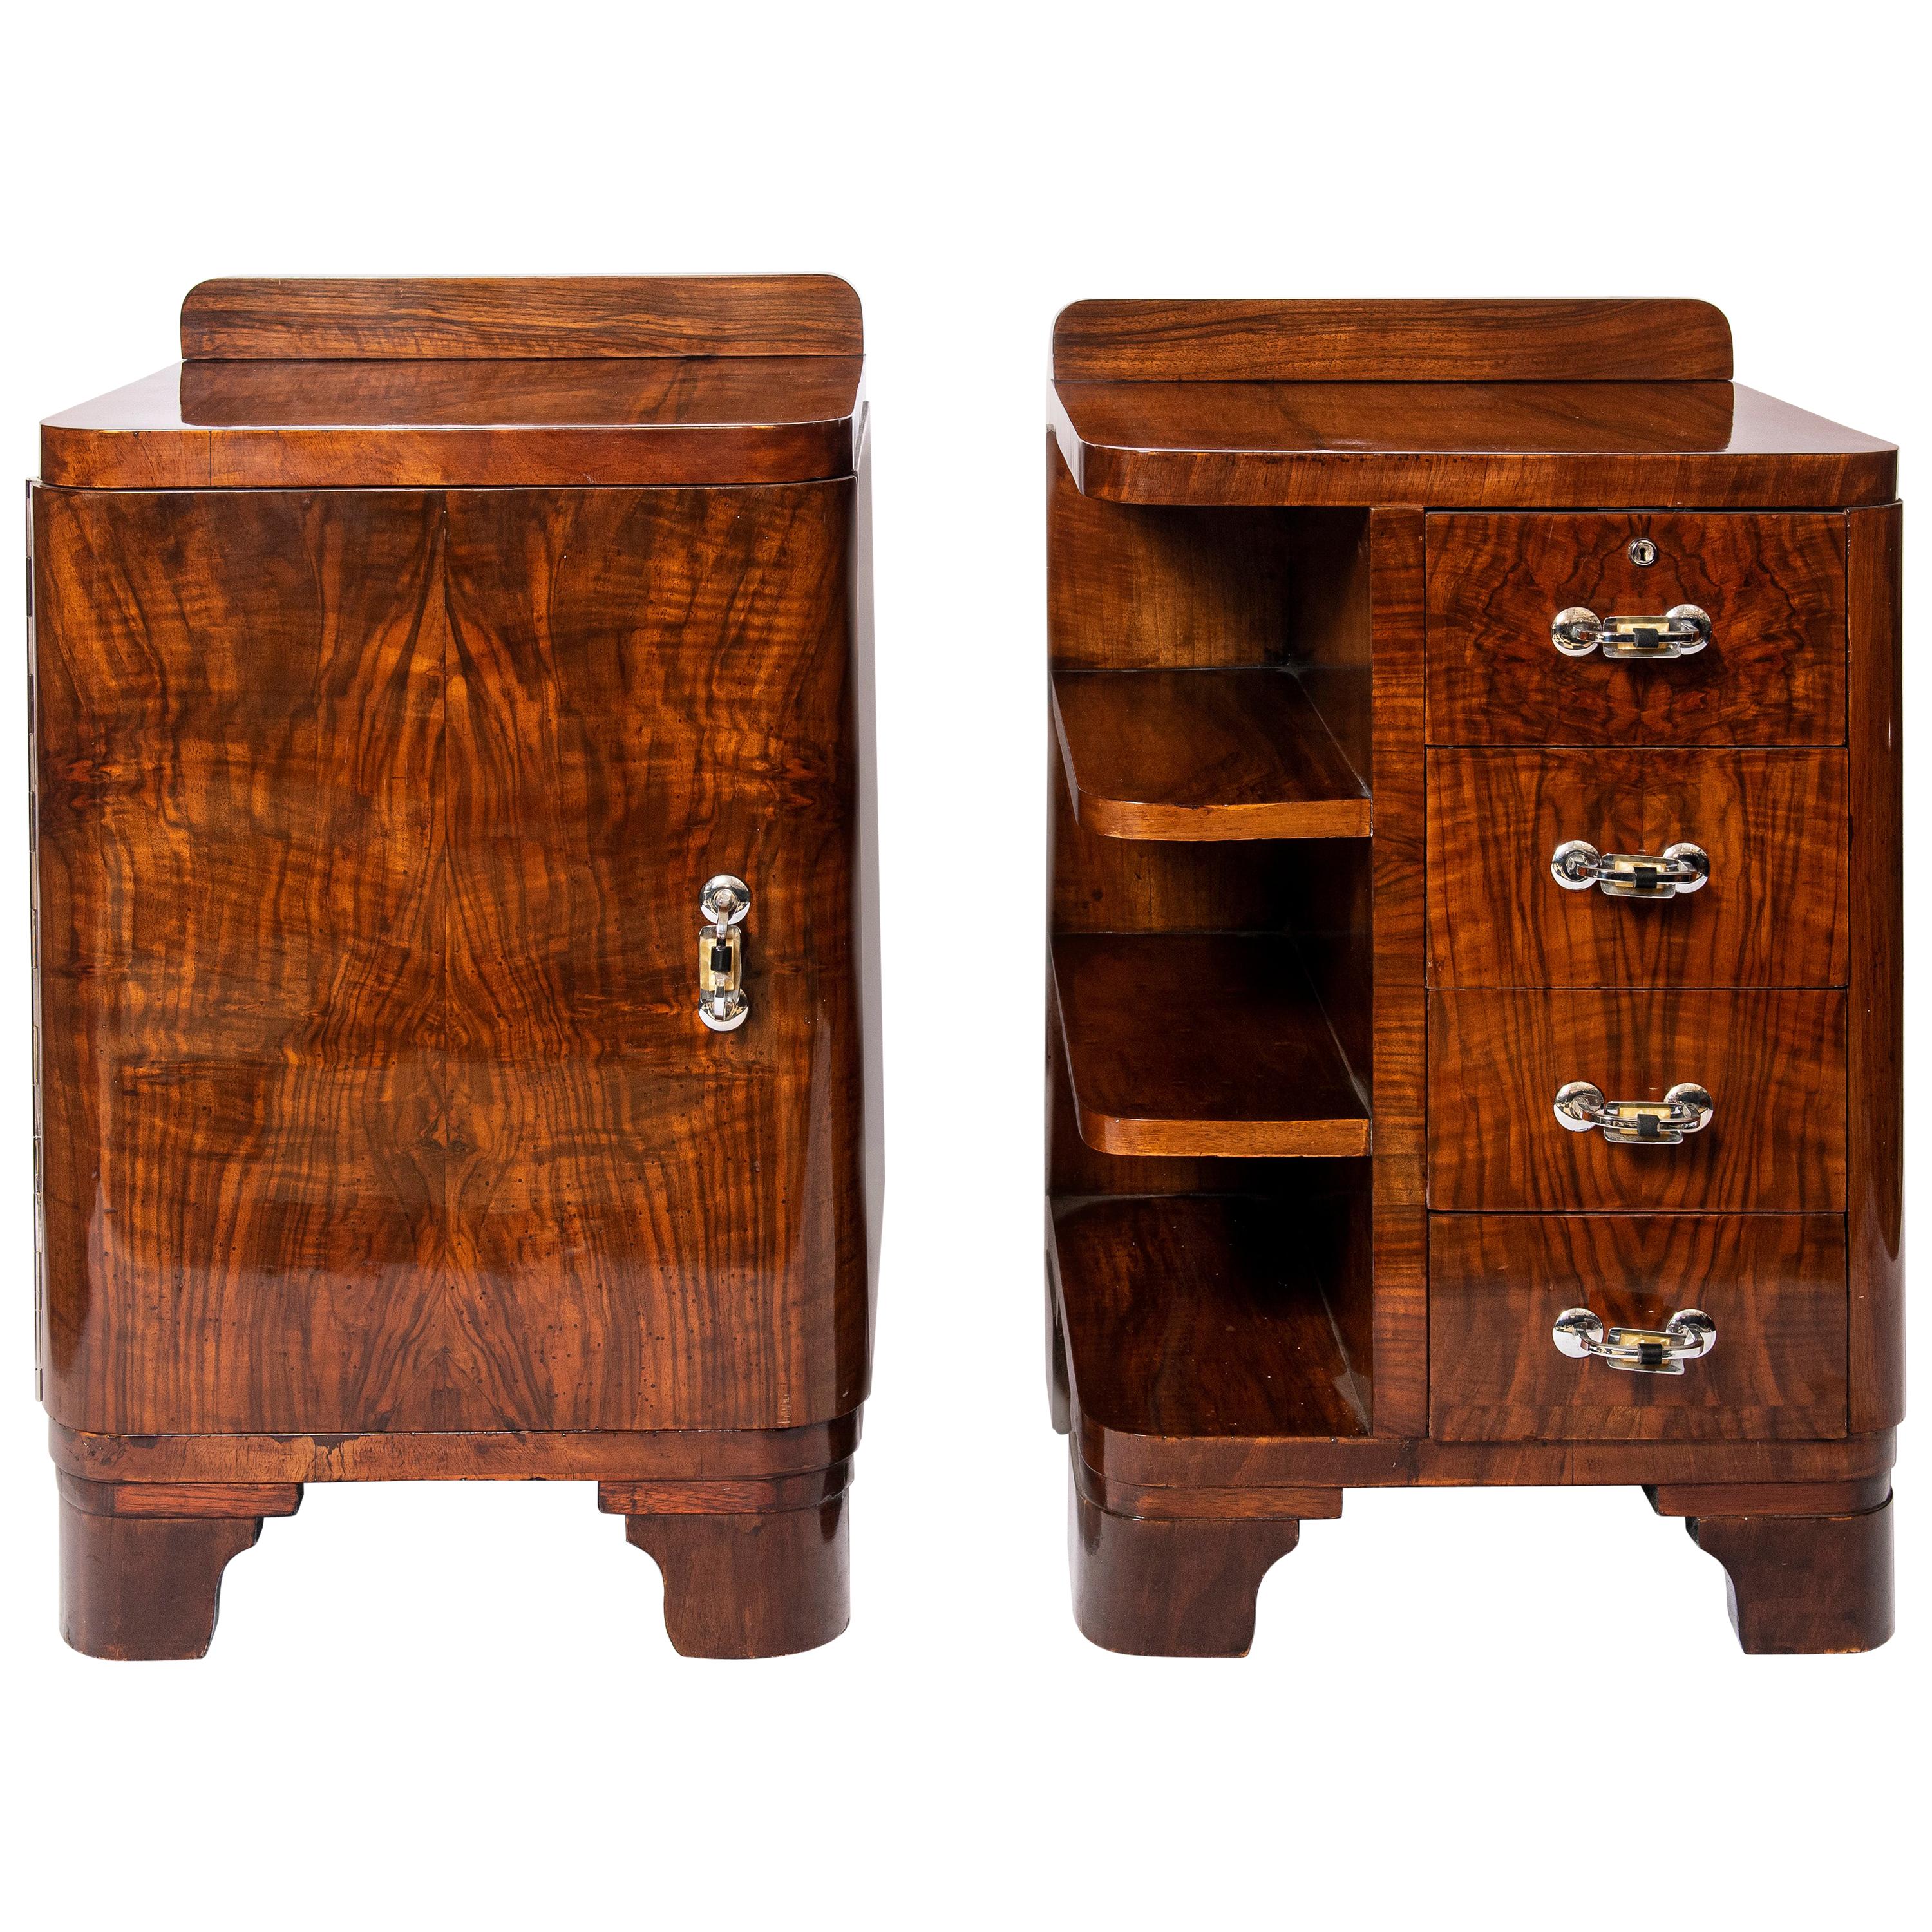 Pair of Wood and Chrome Metal Nightstands, Art Deco Period, France, circa 1940 For Sale